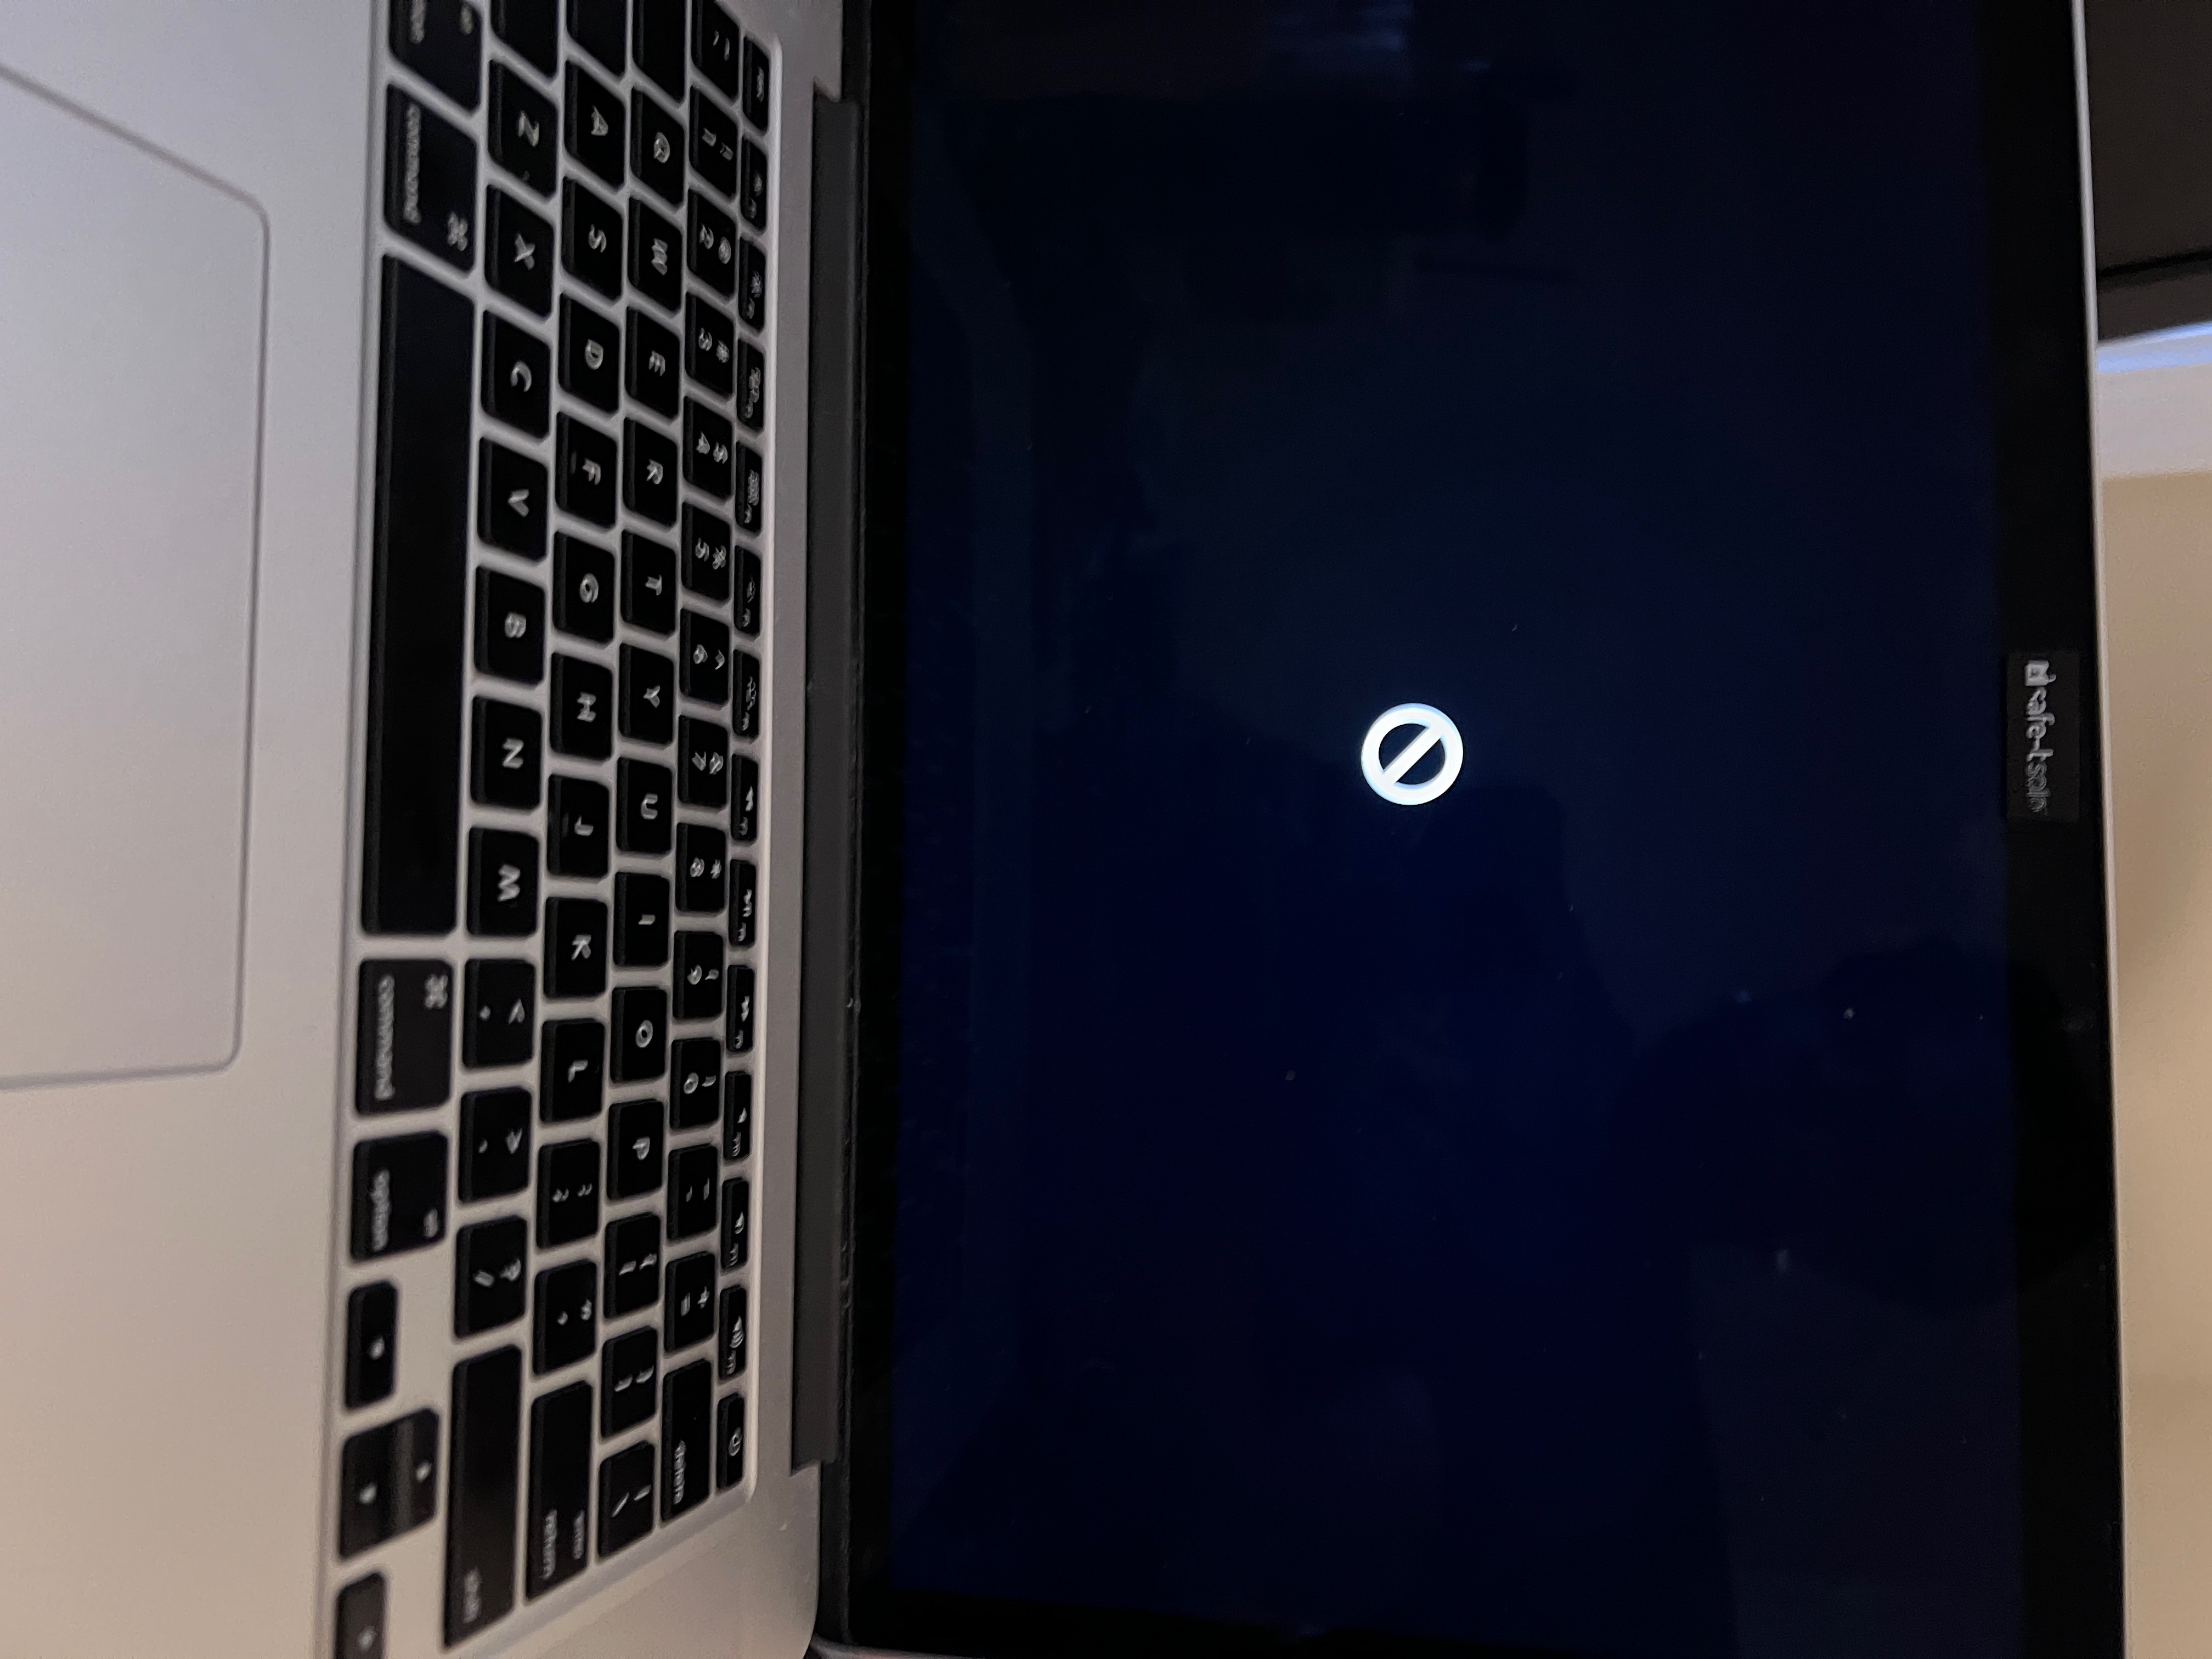 If your Mac starts up to a circle with a line through it - Apple